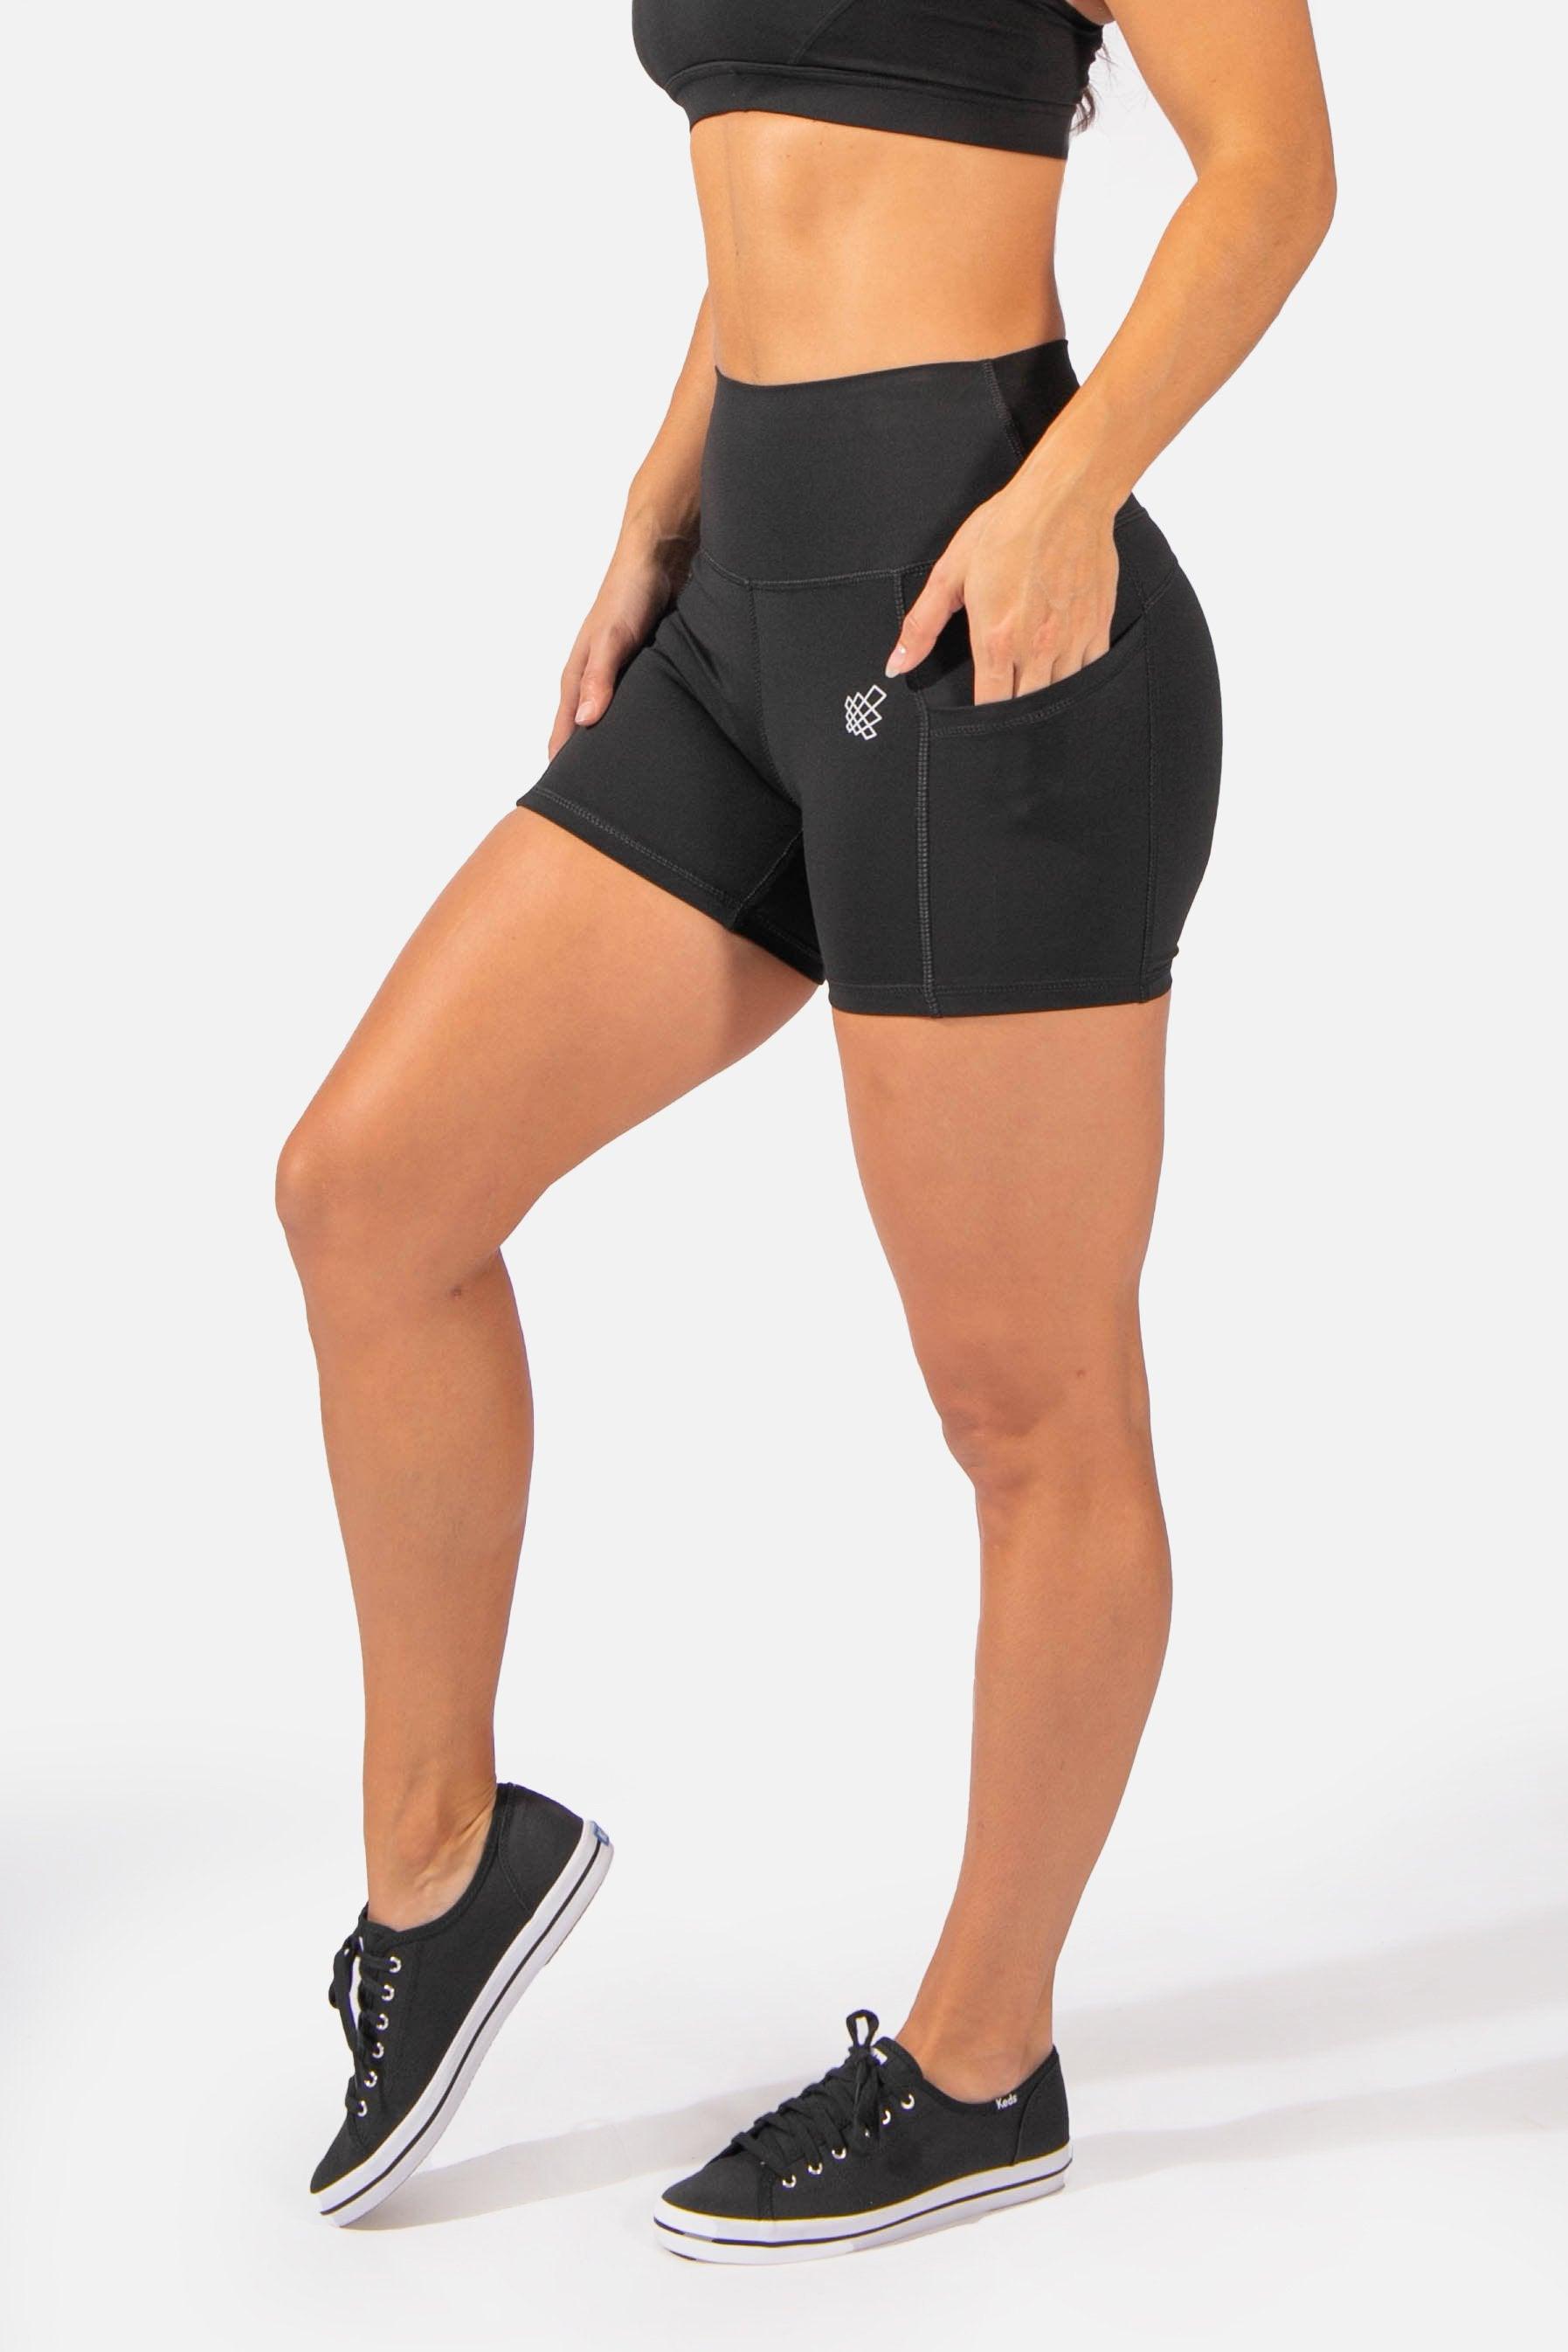 High-Waisted Shorts With Pockets - Black (4457775693891)